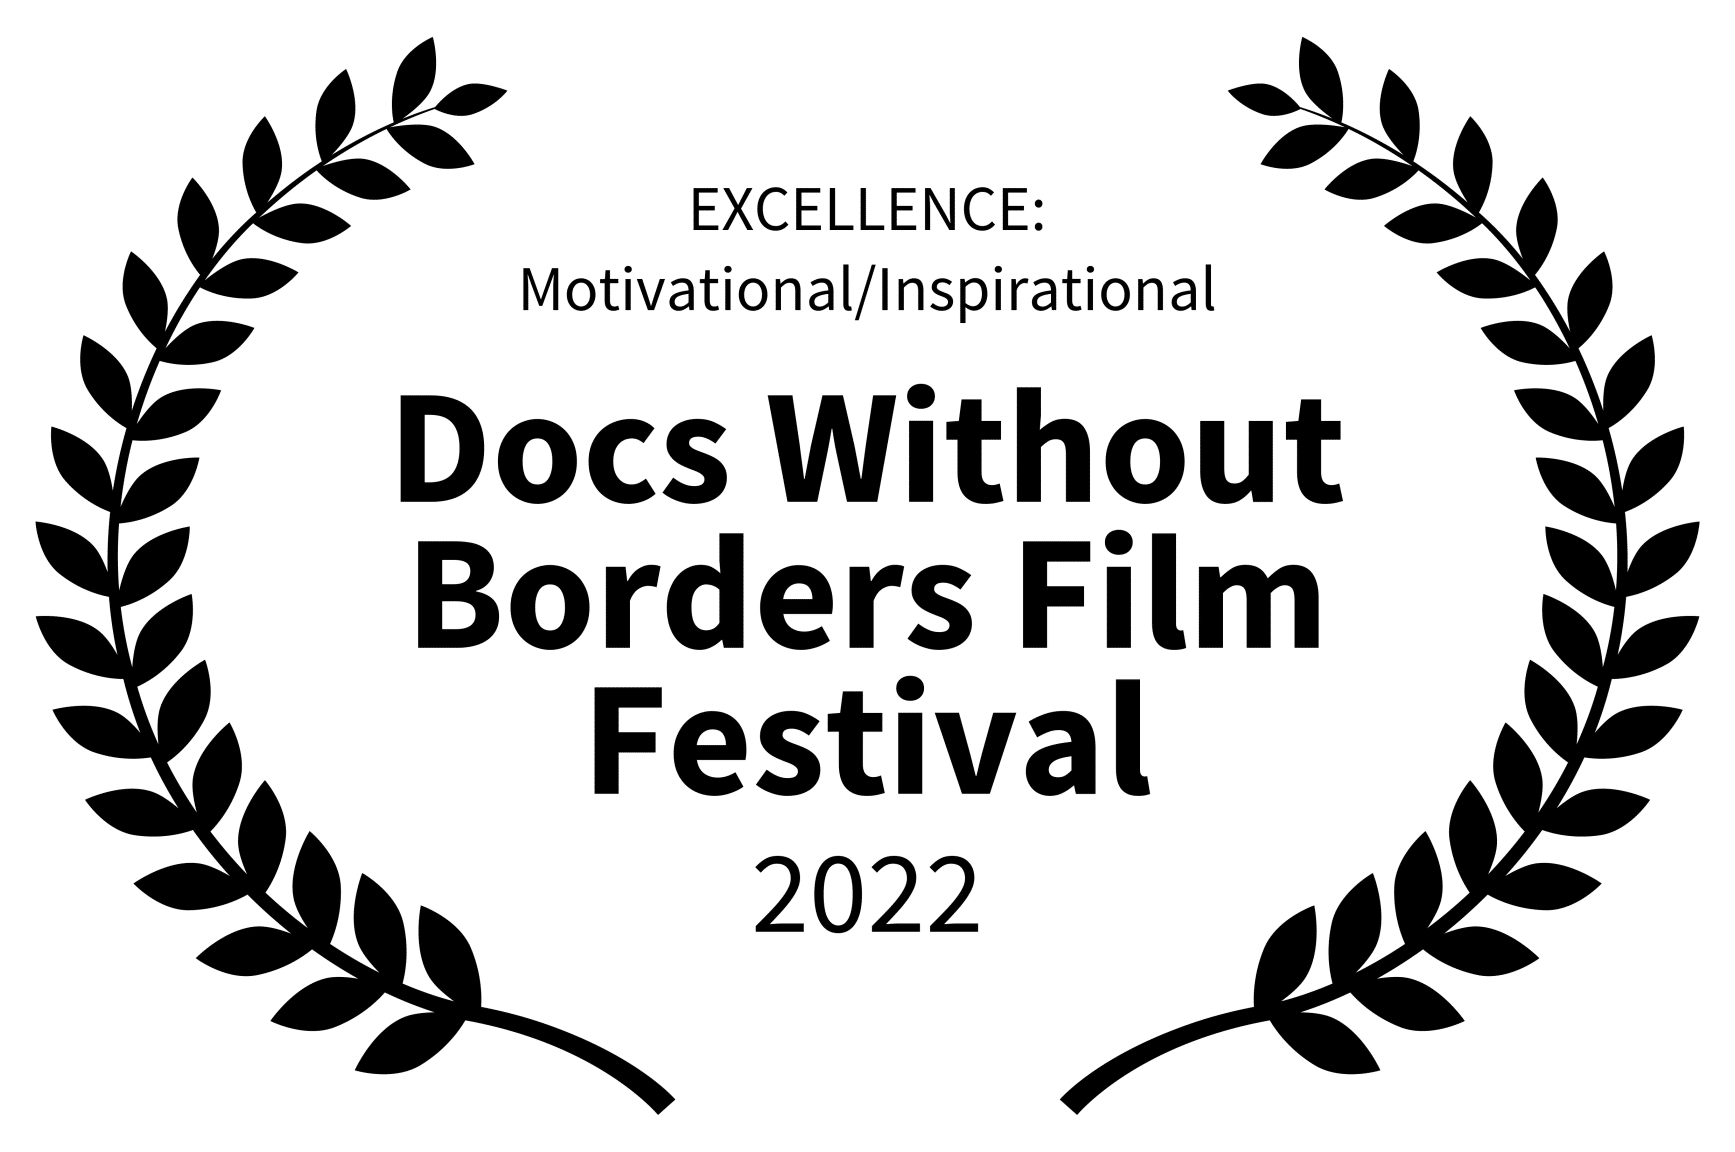 EXCELLENCE-MotivationalInspirational—Docs-Without-Borders-Film-Festival—2022 2